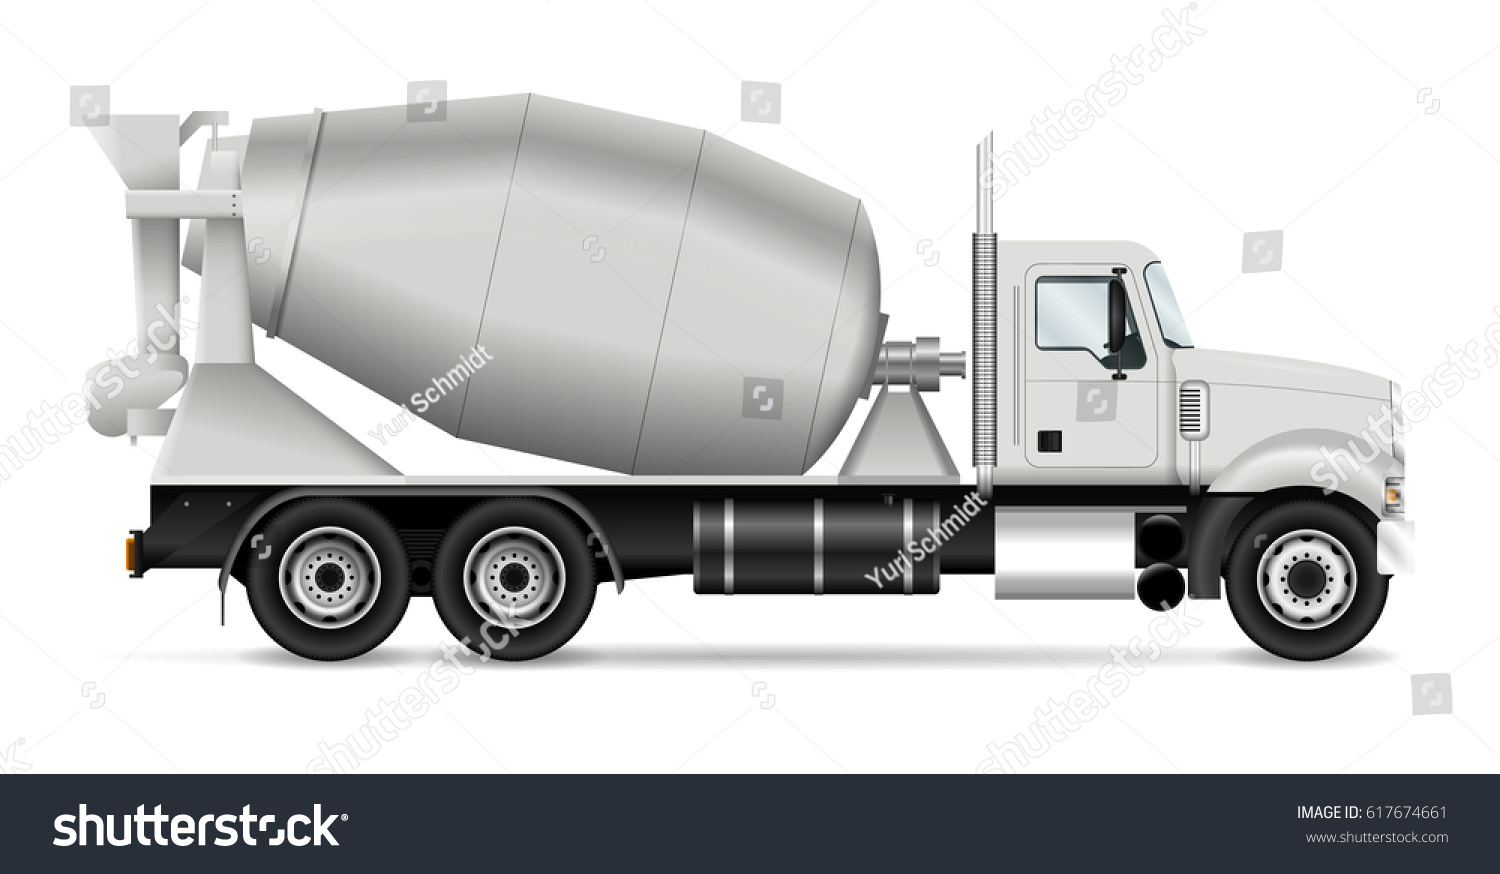 SVG of Mixer truck vector illustration, view from side. Template for corporate identity, branding and advertising. All layers and groups well organized for easy editing and recolor. svg